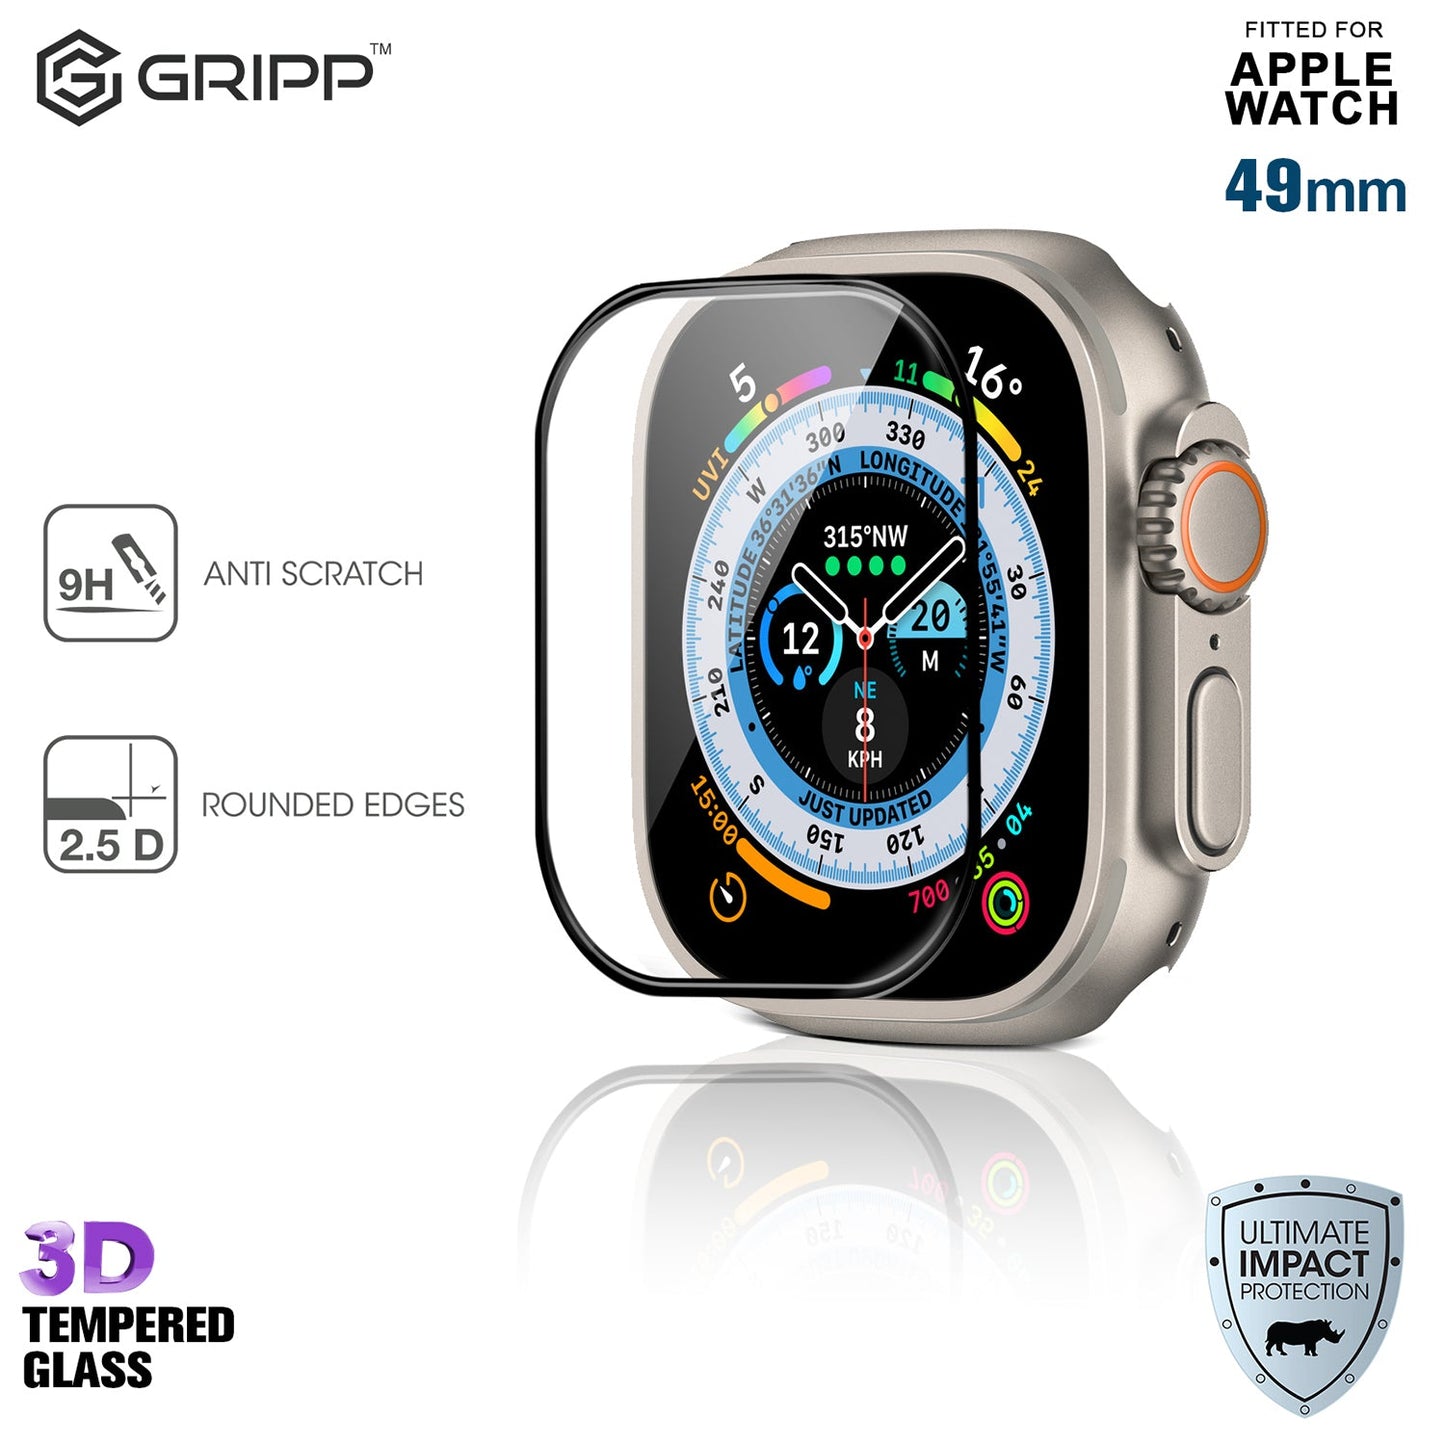 Gripp 3d Tempered Glass For Apple Watch 49mm - Black